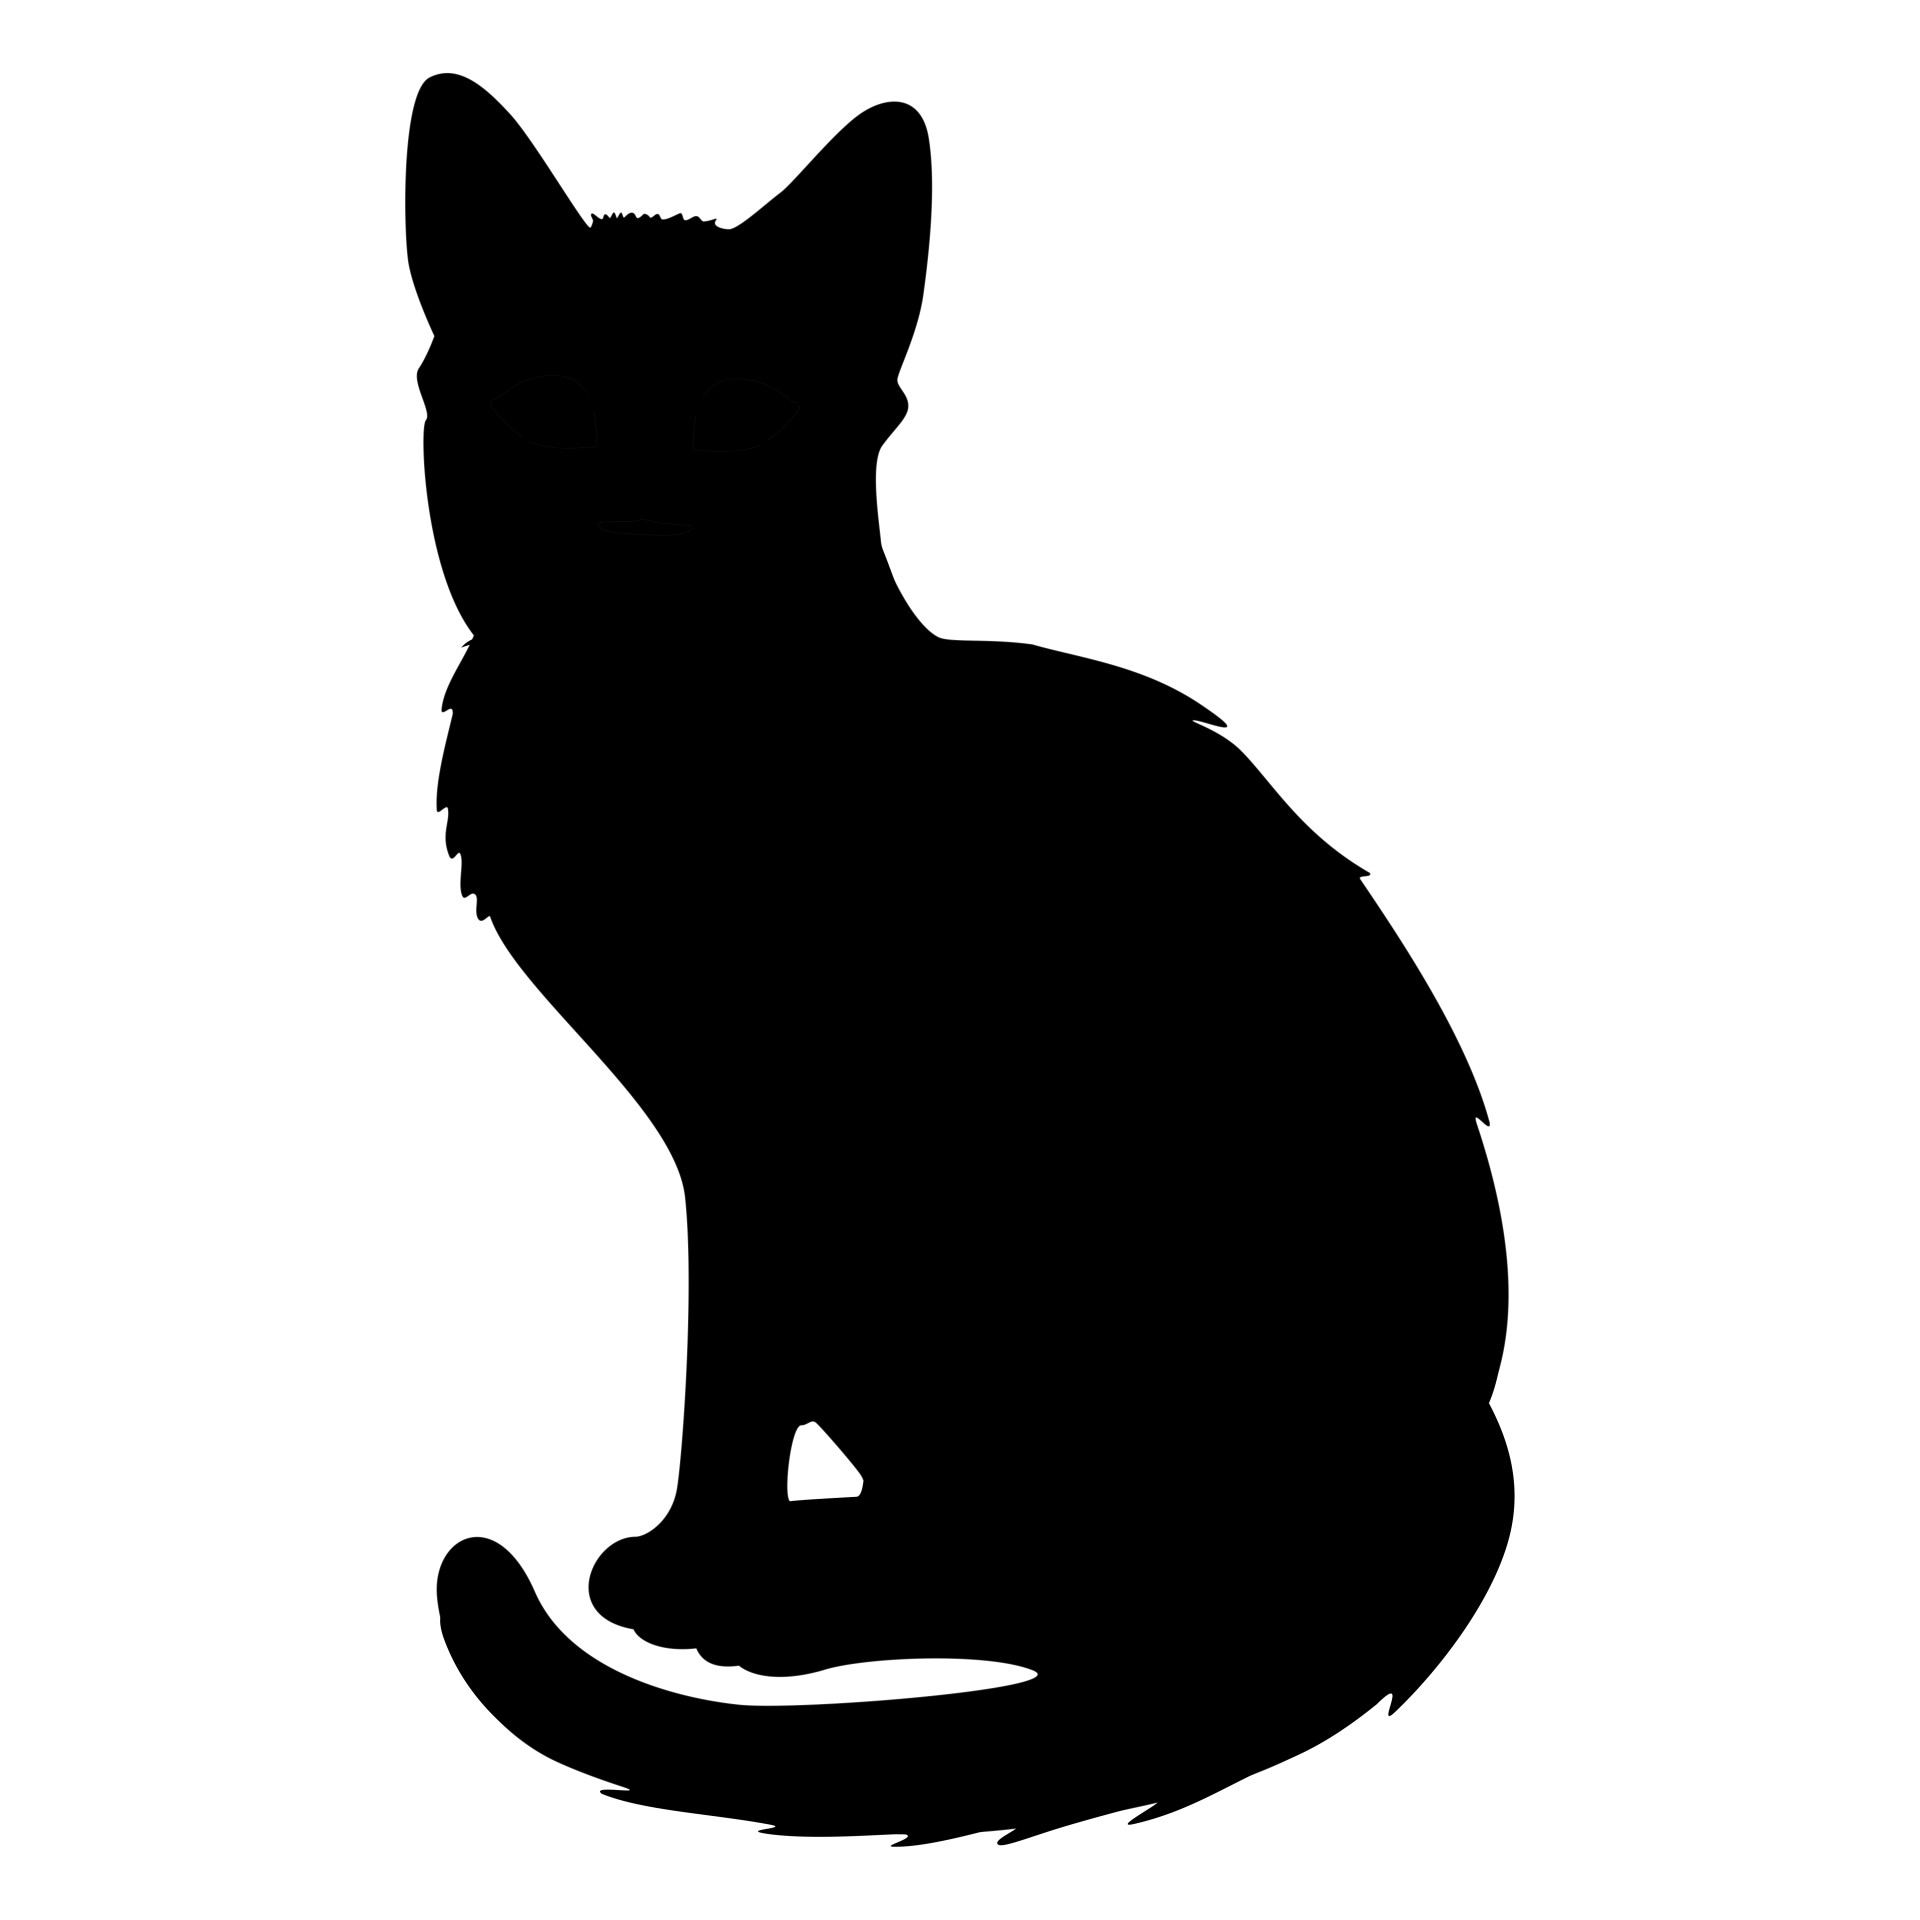 Free Cat Silhouette 2, Download Free Cat Silhouette 2 png images, Free